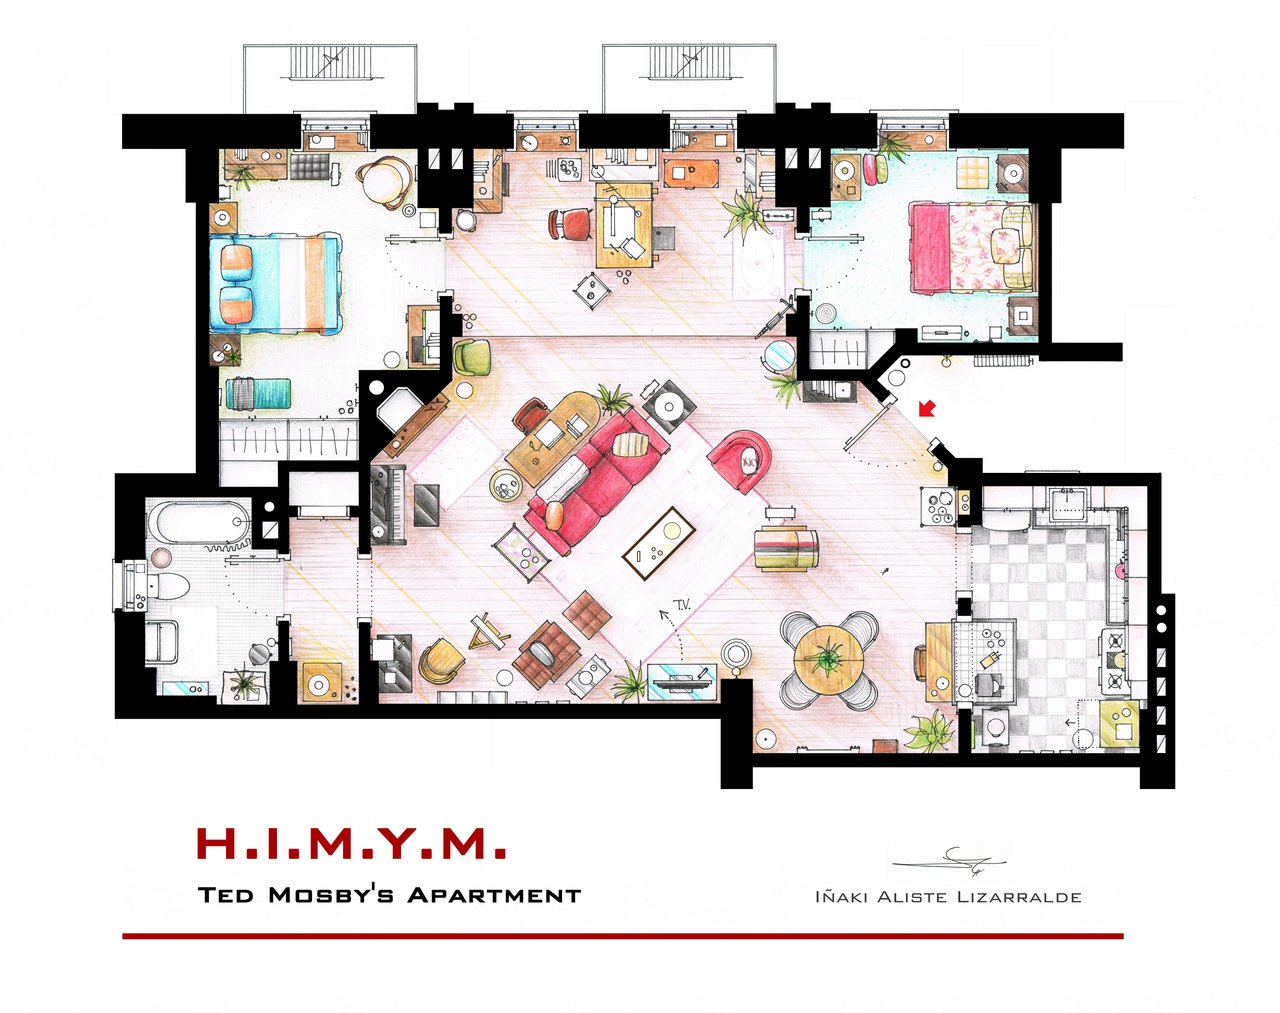 TV Floorplans – How I Met Your Mother, The Big Bang Theory, Friends, Sex and the City